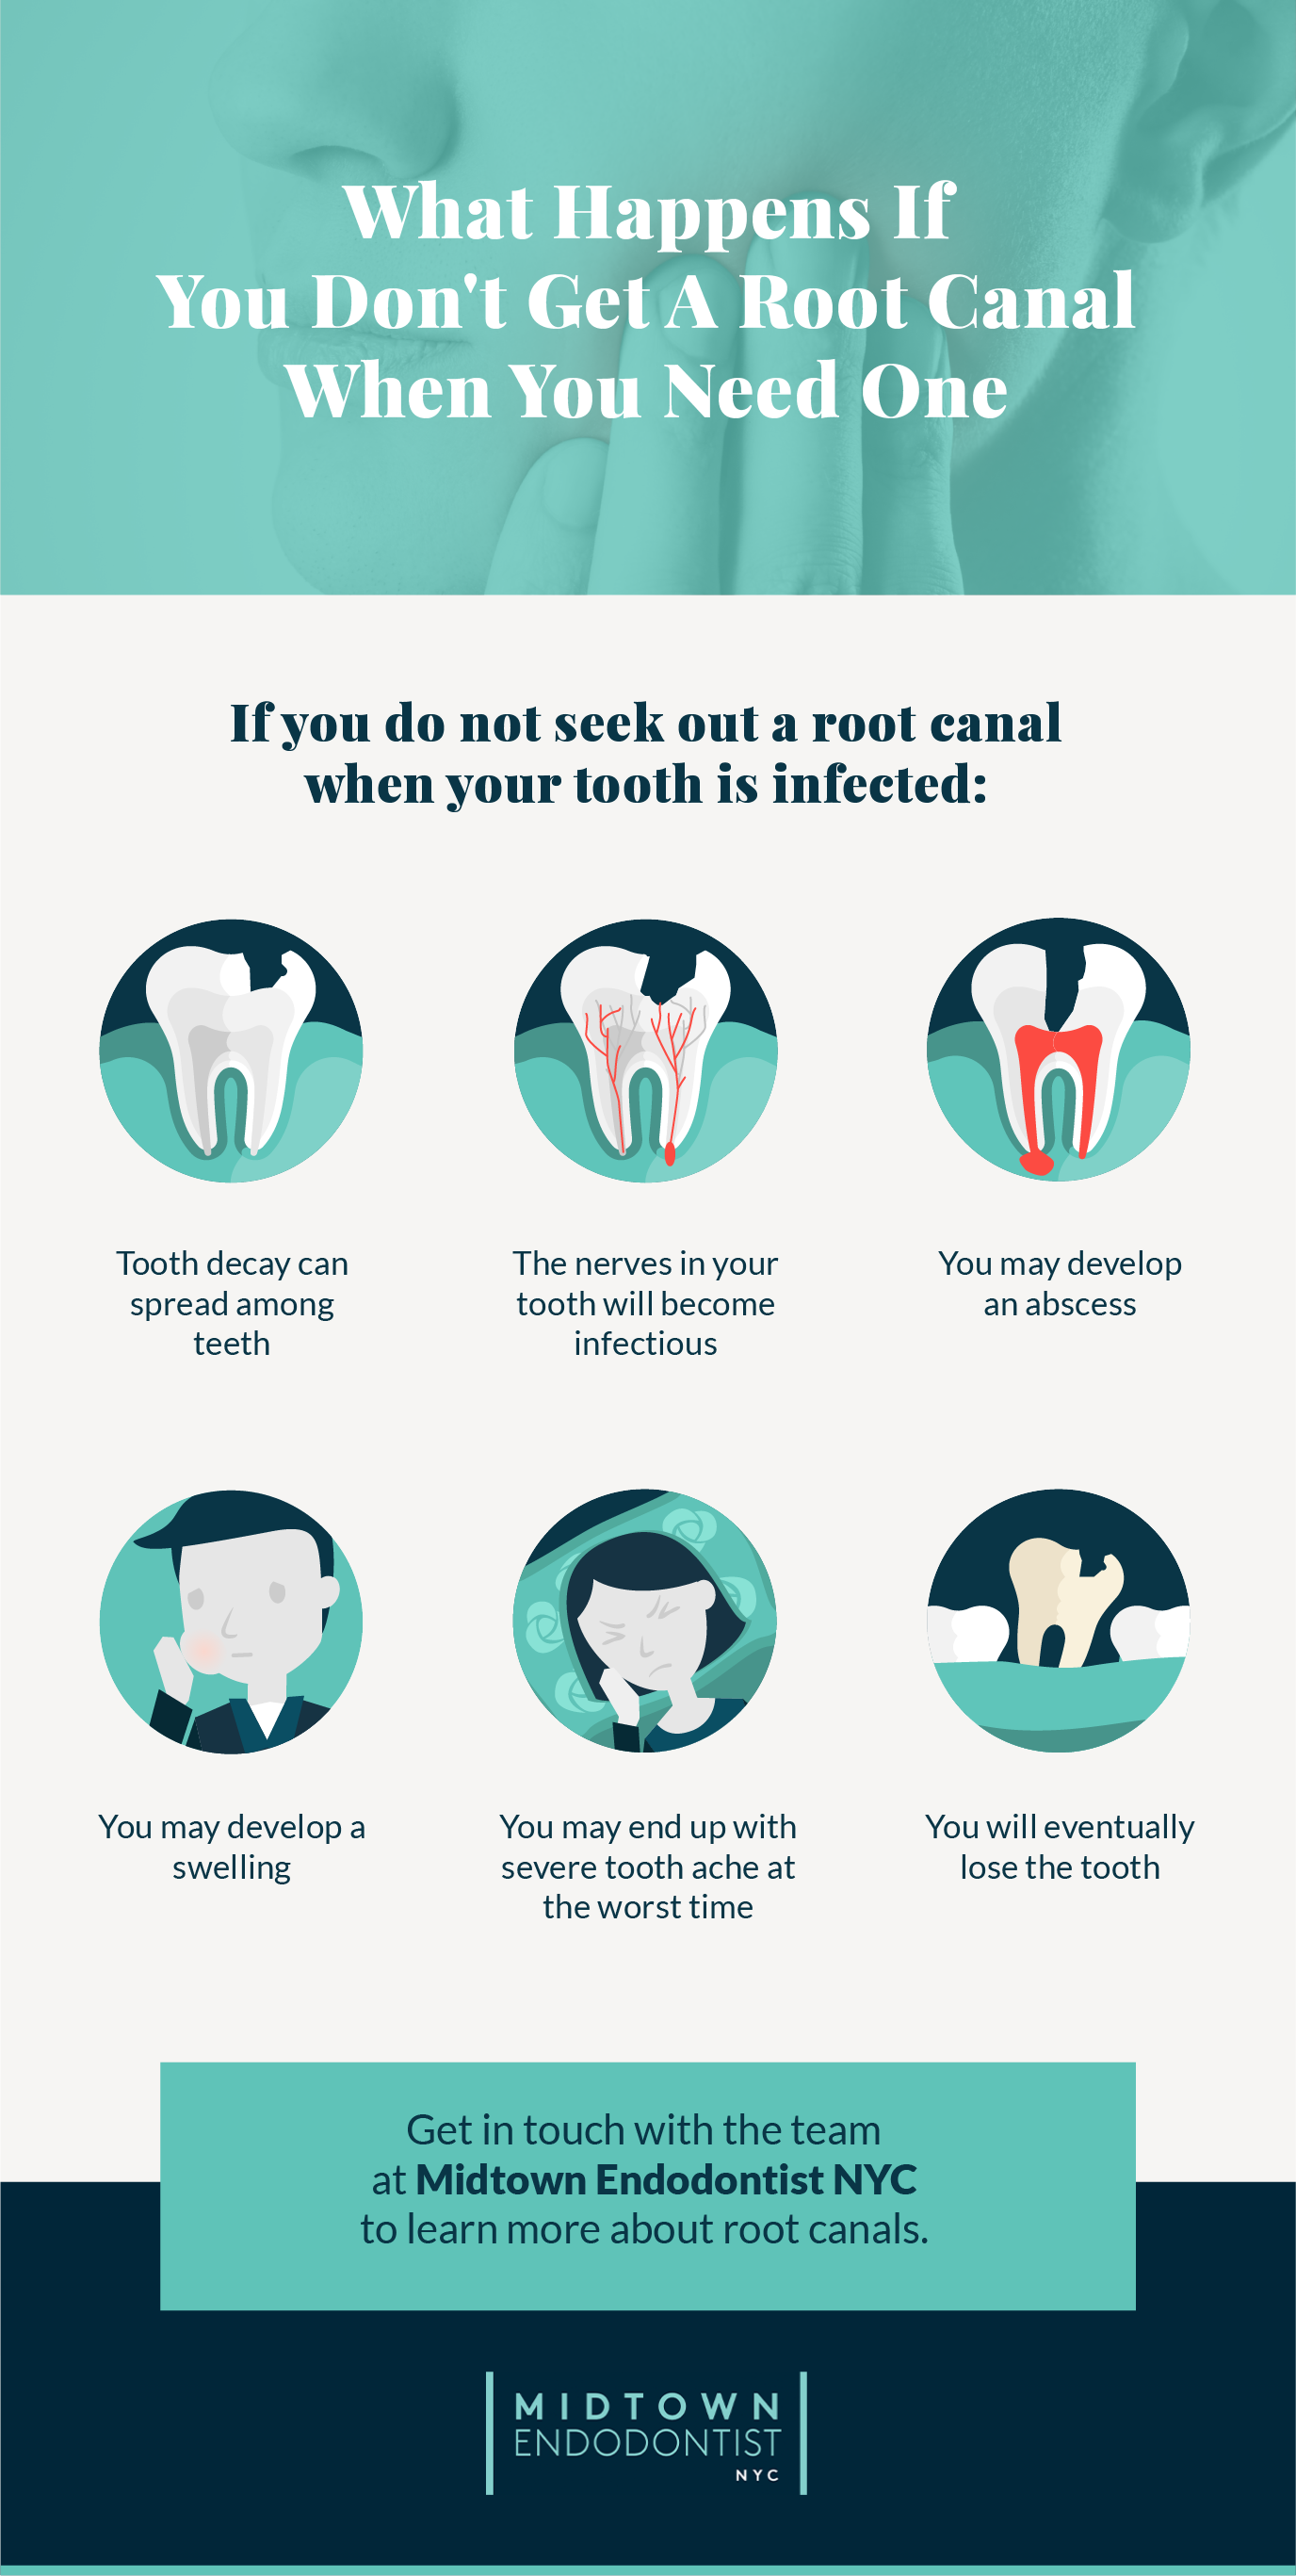 What happens if you don't get a root canal when you need one